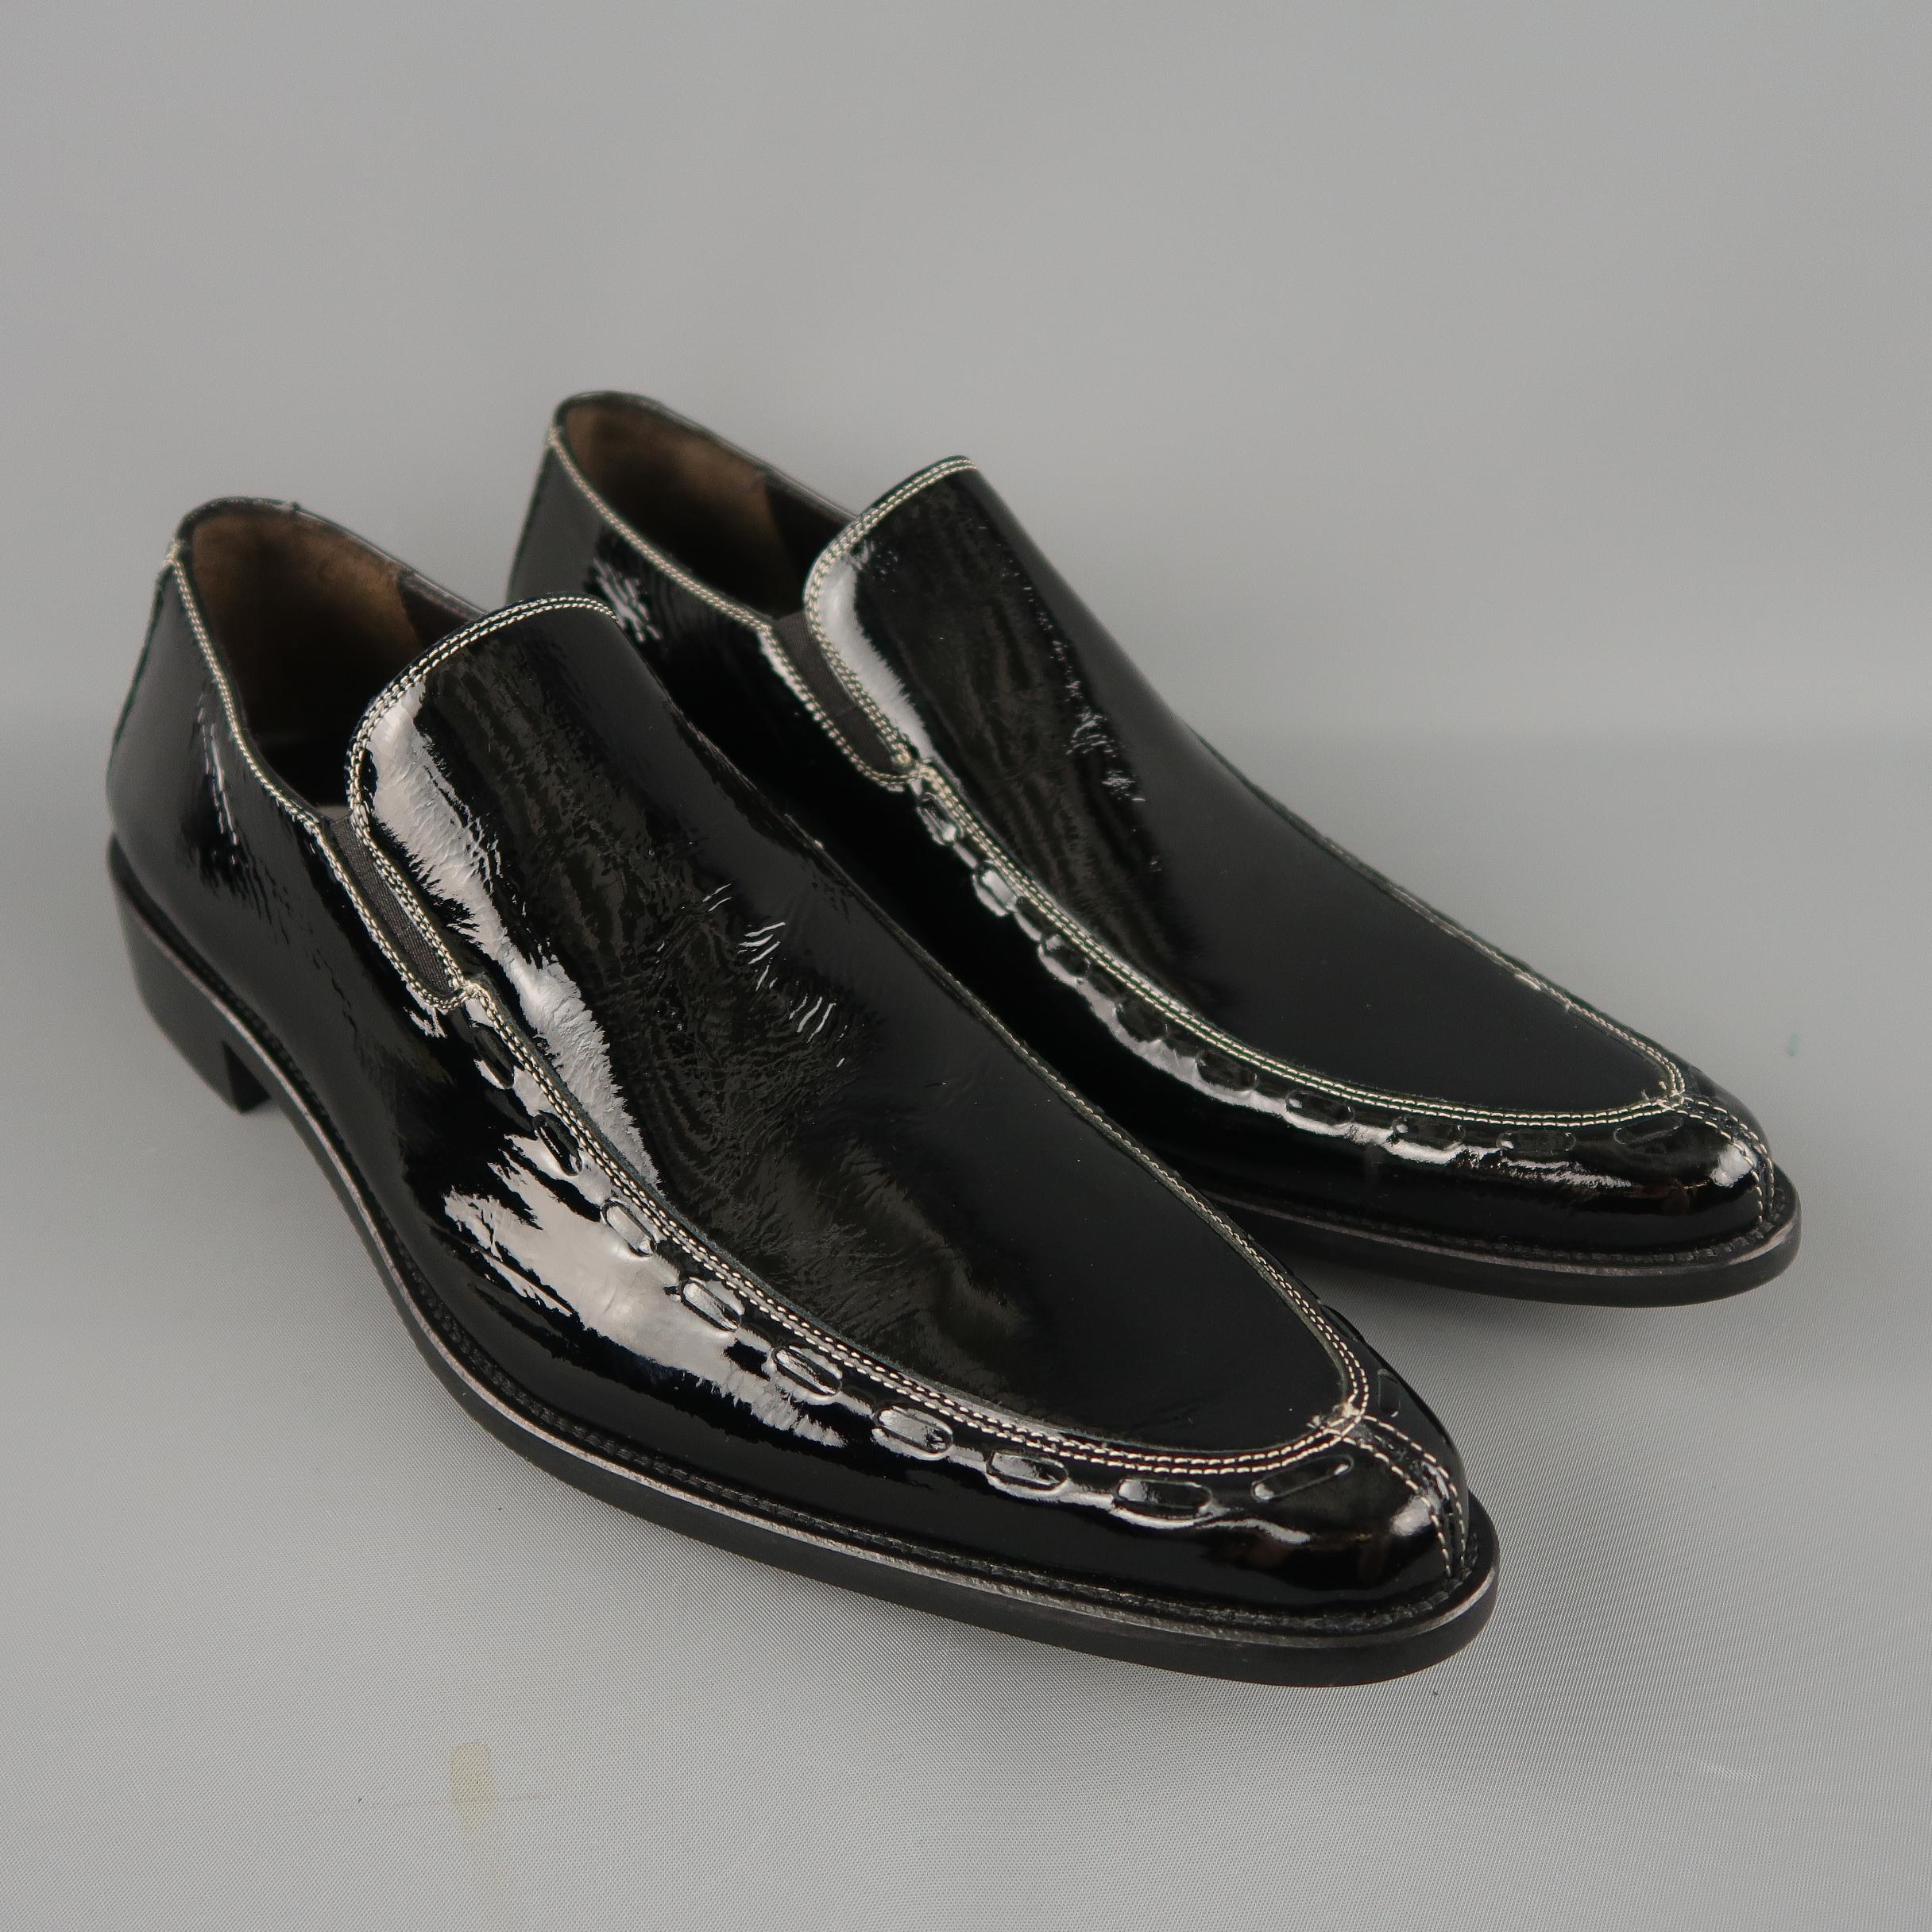 DONALD J PLINER dress loafers come in black patent leather with contrast stitch apron pointed toe, heeled sole, and whipstitch detail. Made in Italy.
 
New without Tags.
Marked: 10 M
 
Outsole: 13 x 4.5 in.